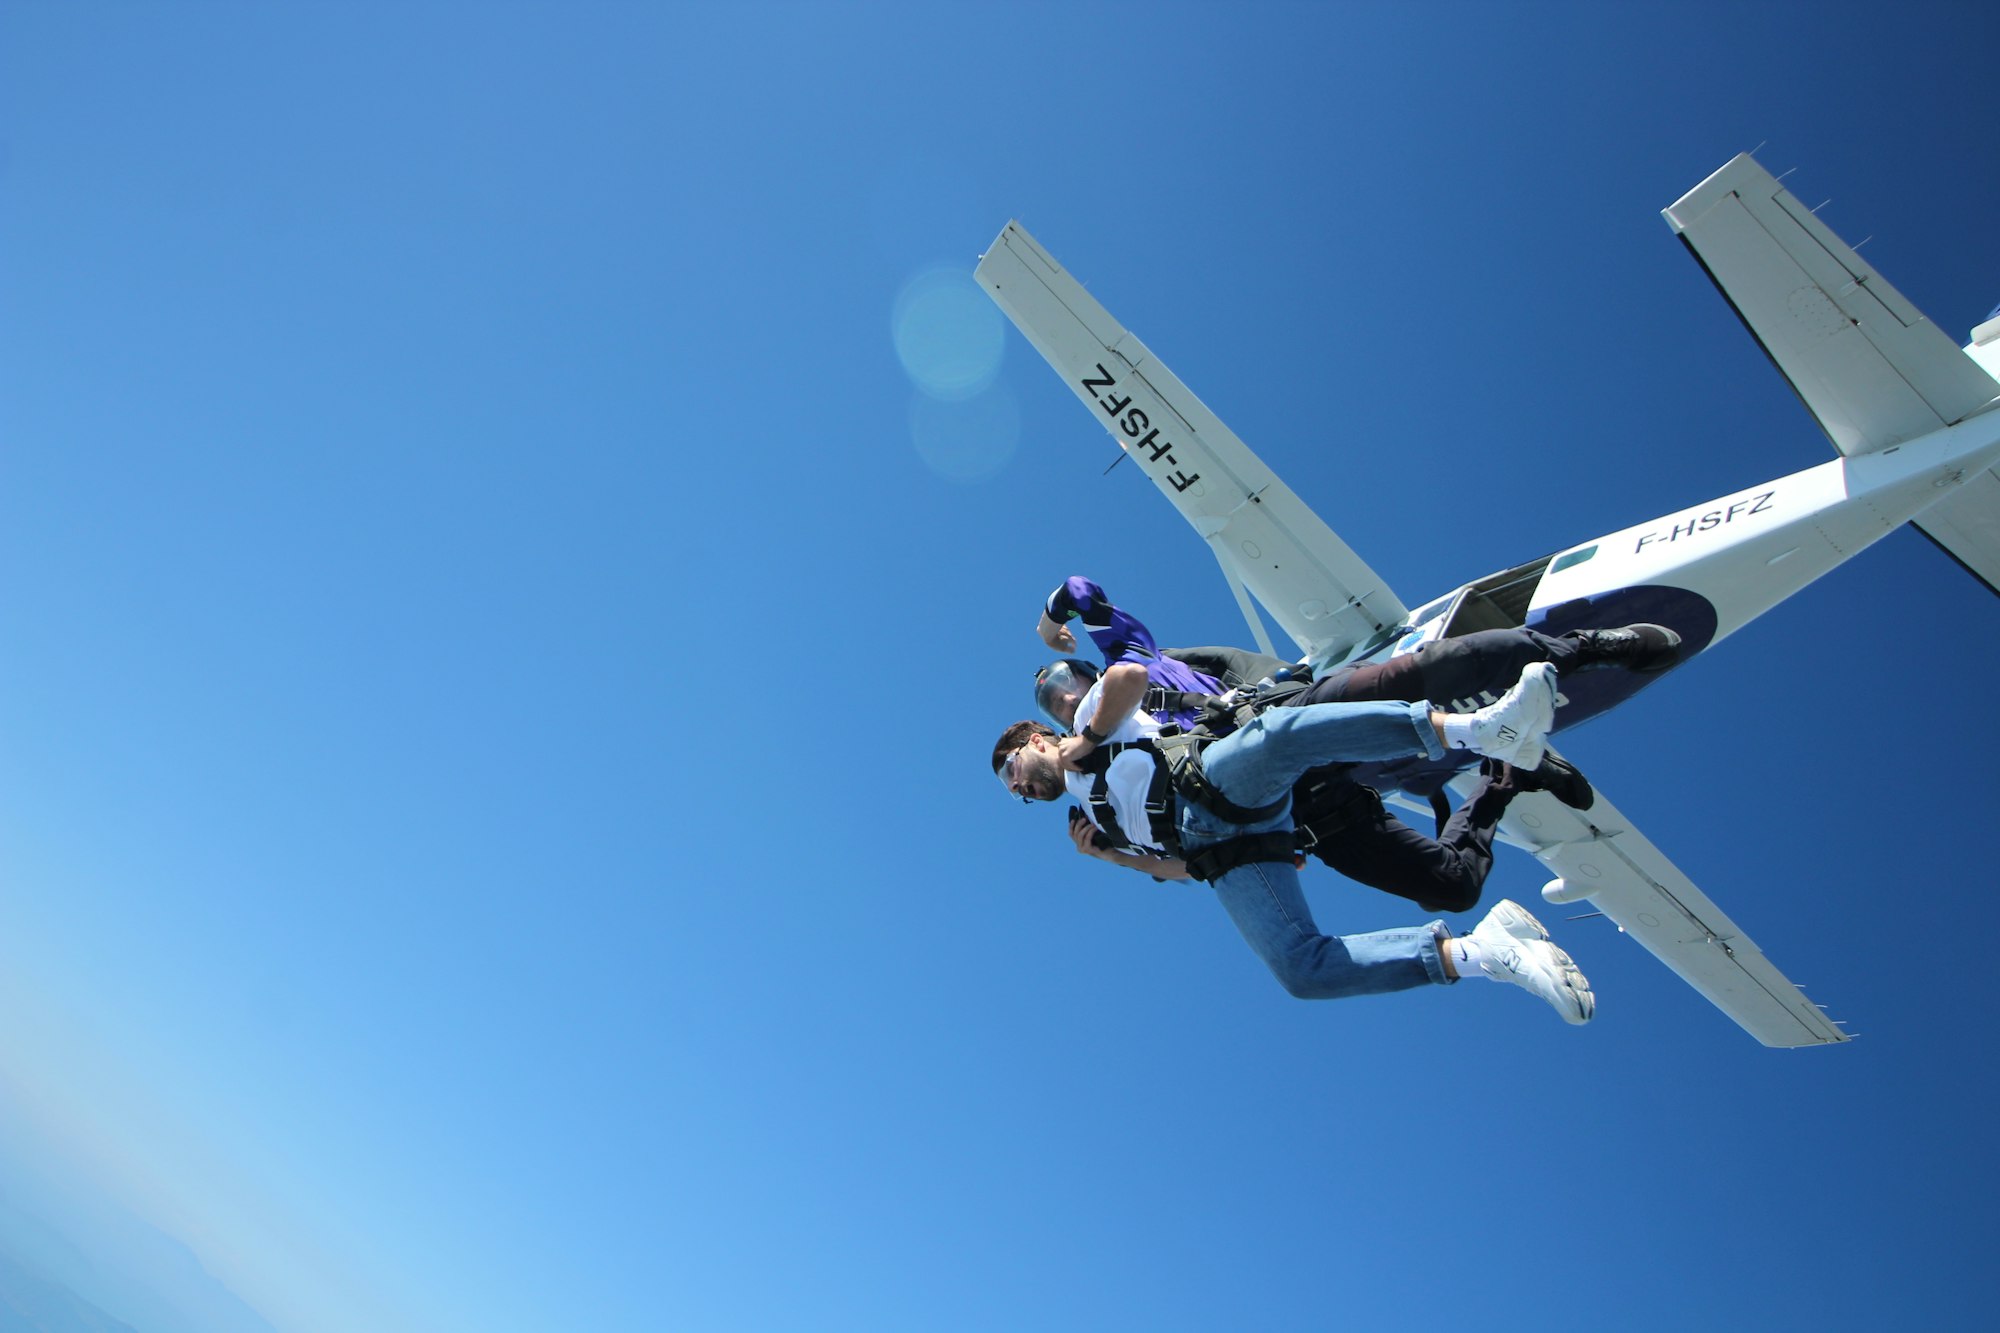 Can You Skydive?